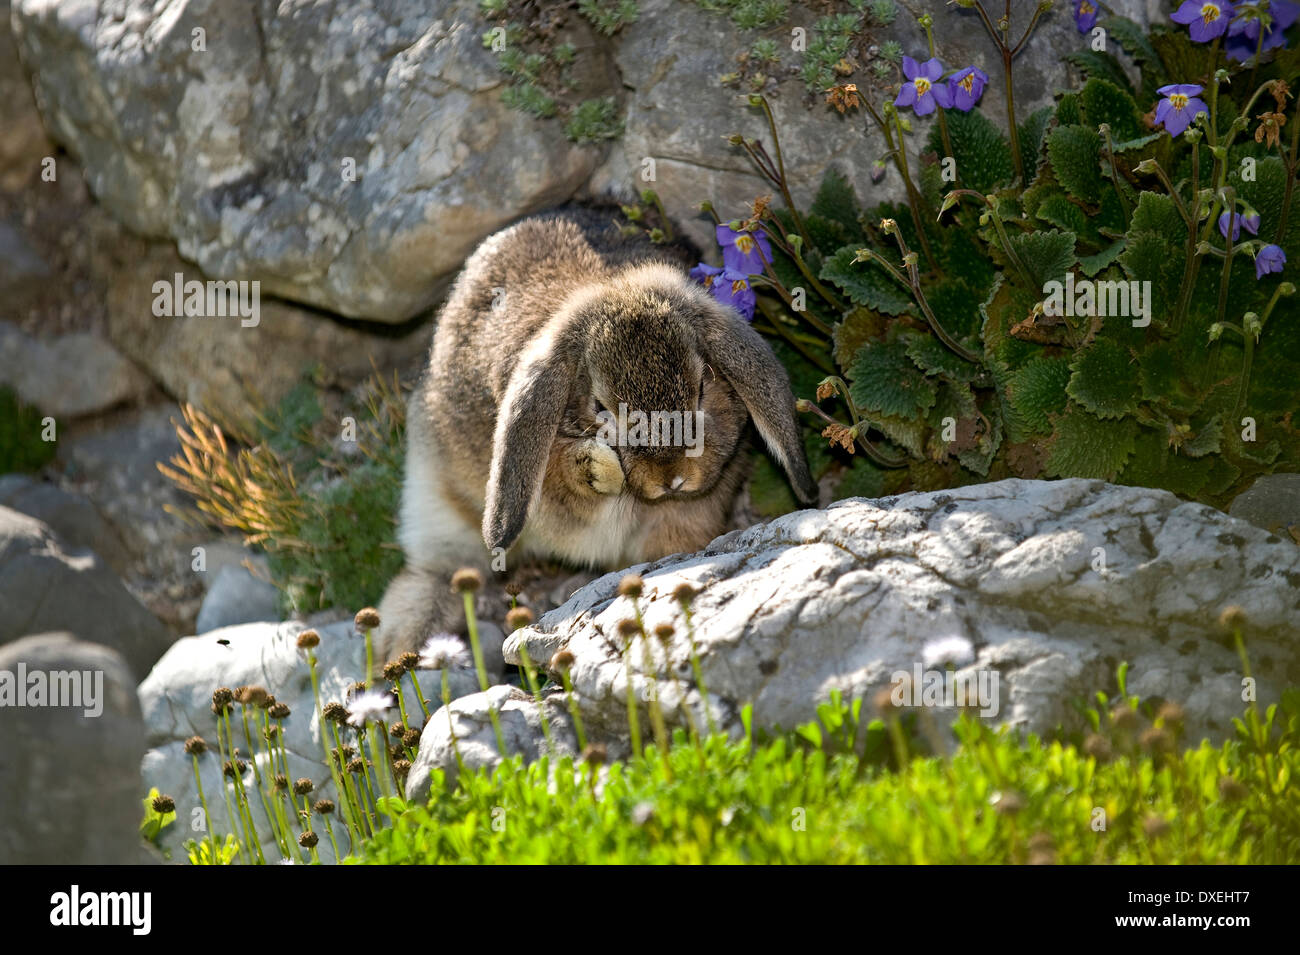 Agouti Mini Lop rabbit (9 weeks old) grooming itself in a rock garden Stock Photo